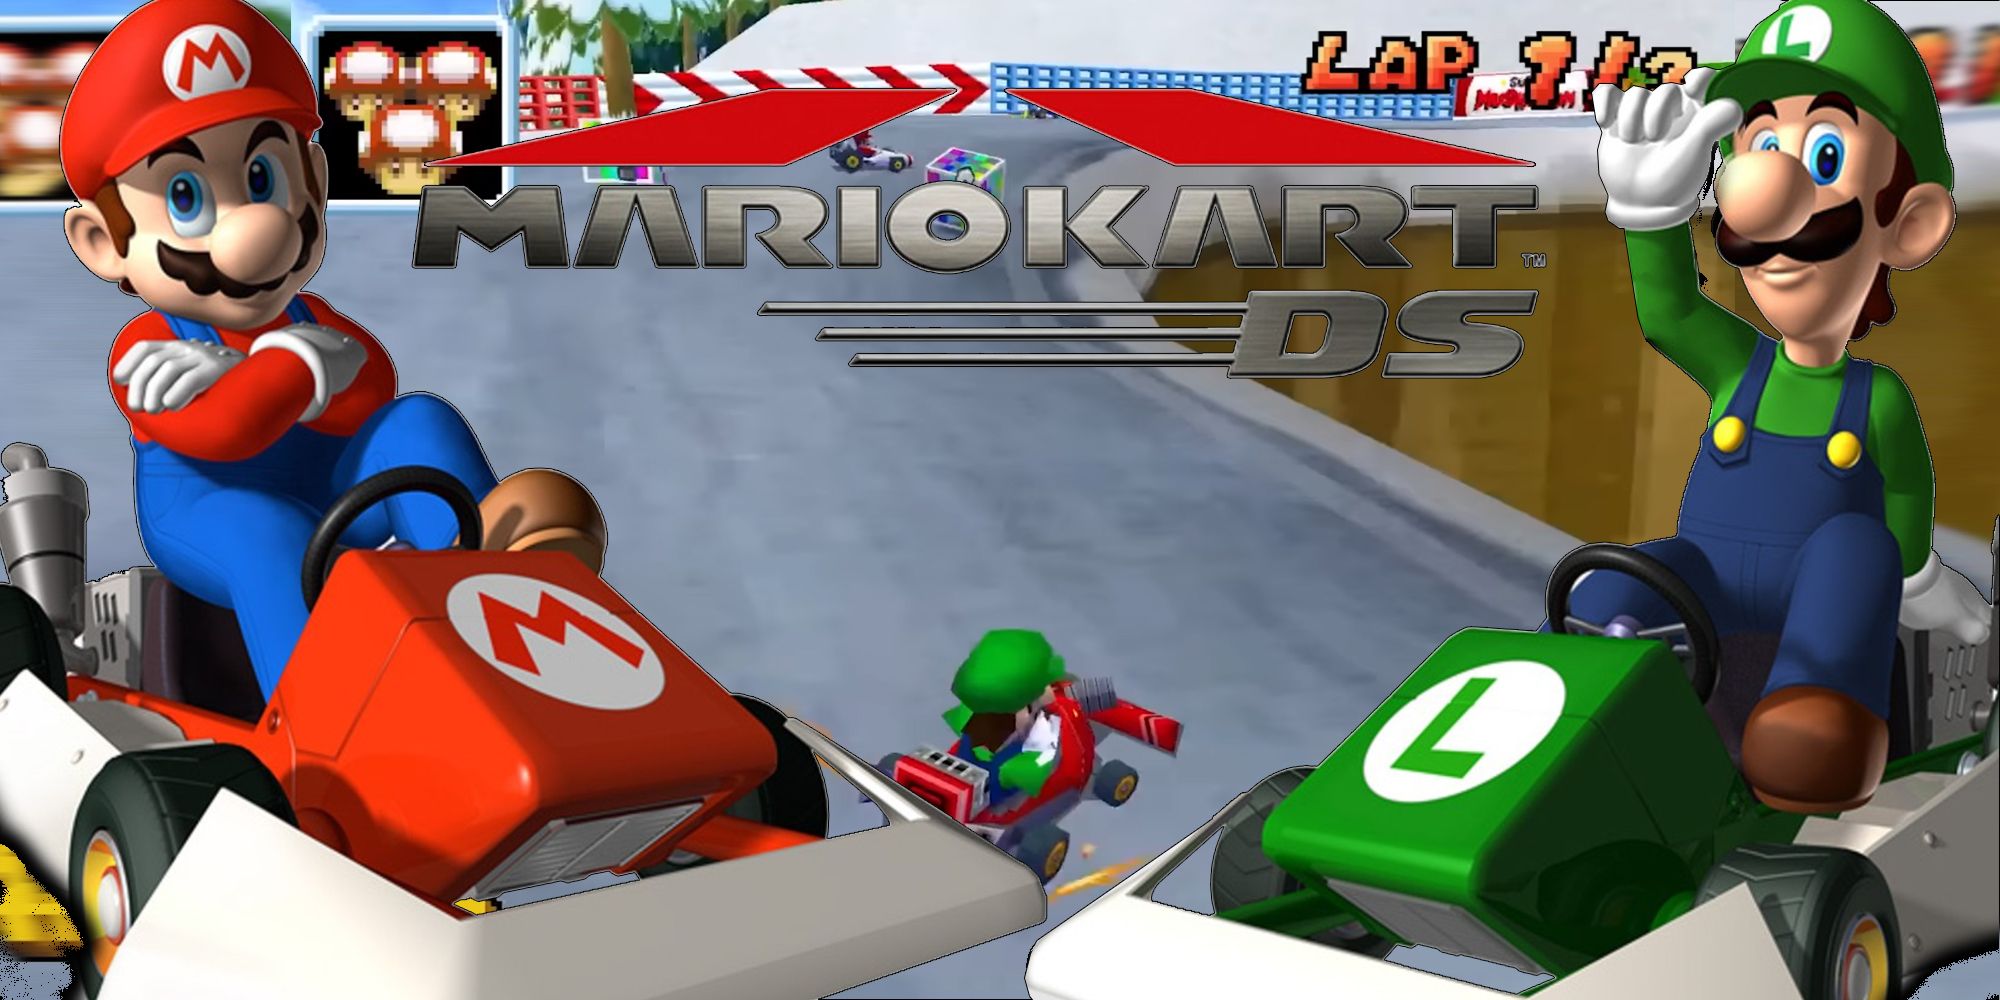 Mario Kart DS (2005) Mario and Luigi on the cover